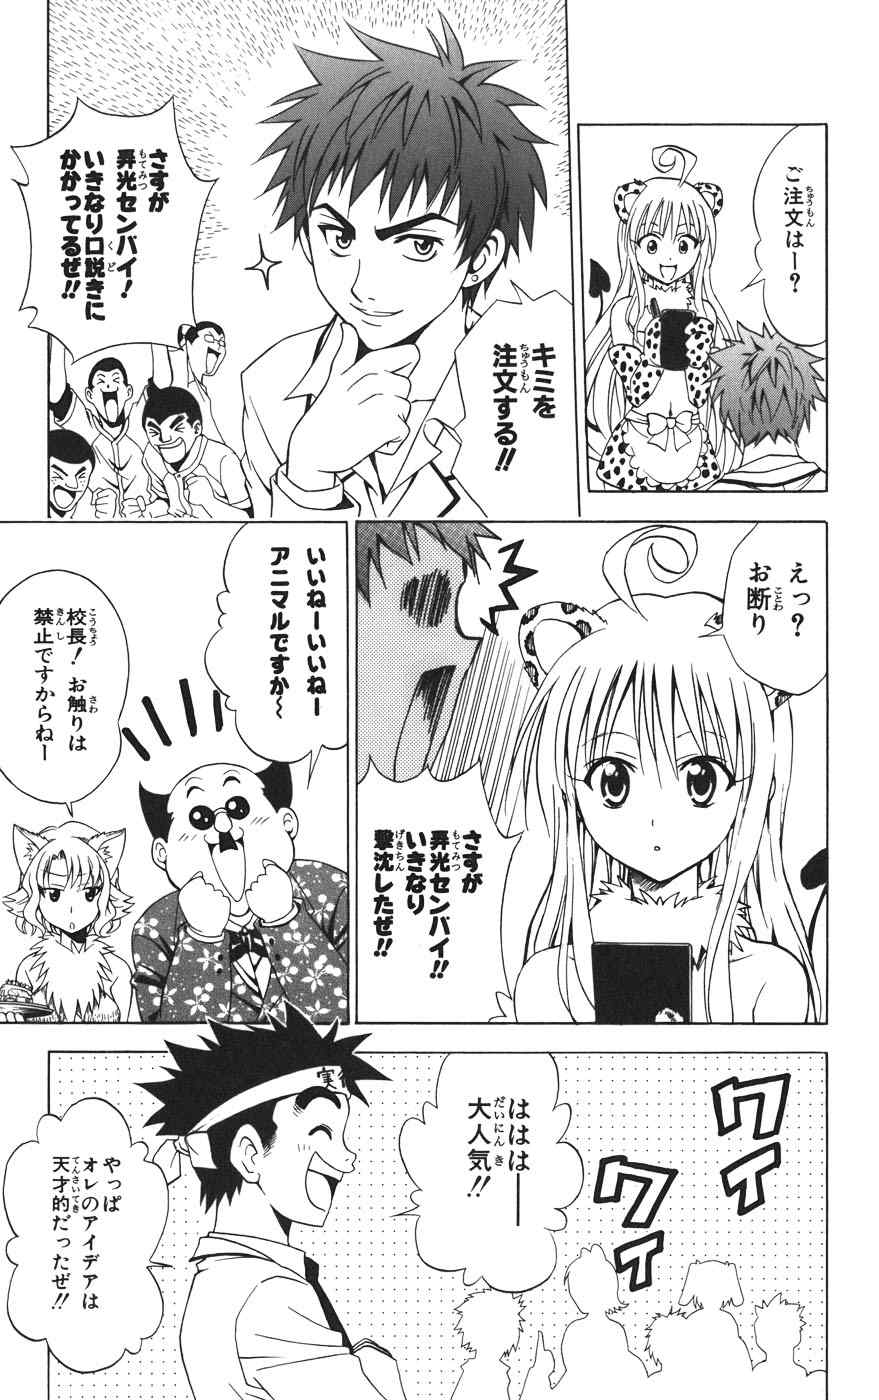 《To LOVEるとらぶる》漫画 To LOVE 04卷